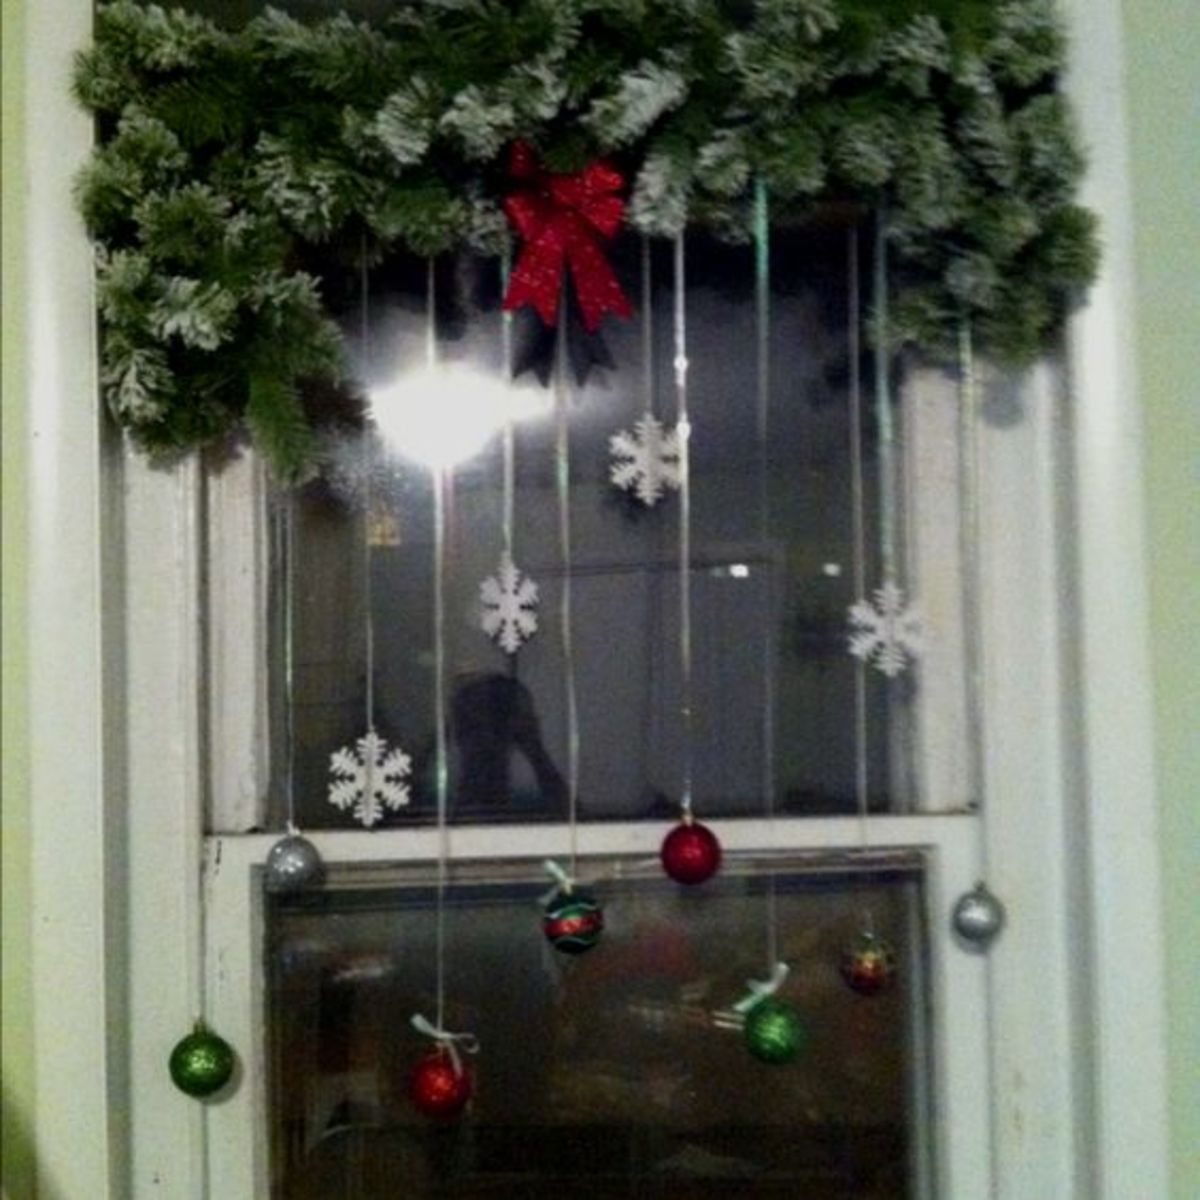 An evergreen swag is the key feature of this cheerful window. Baubles and snowflakes hang from the swag.